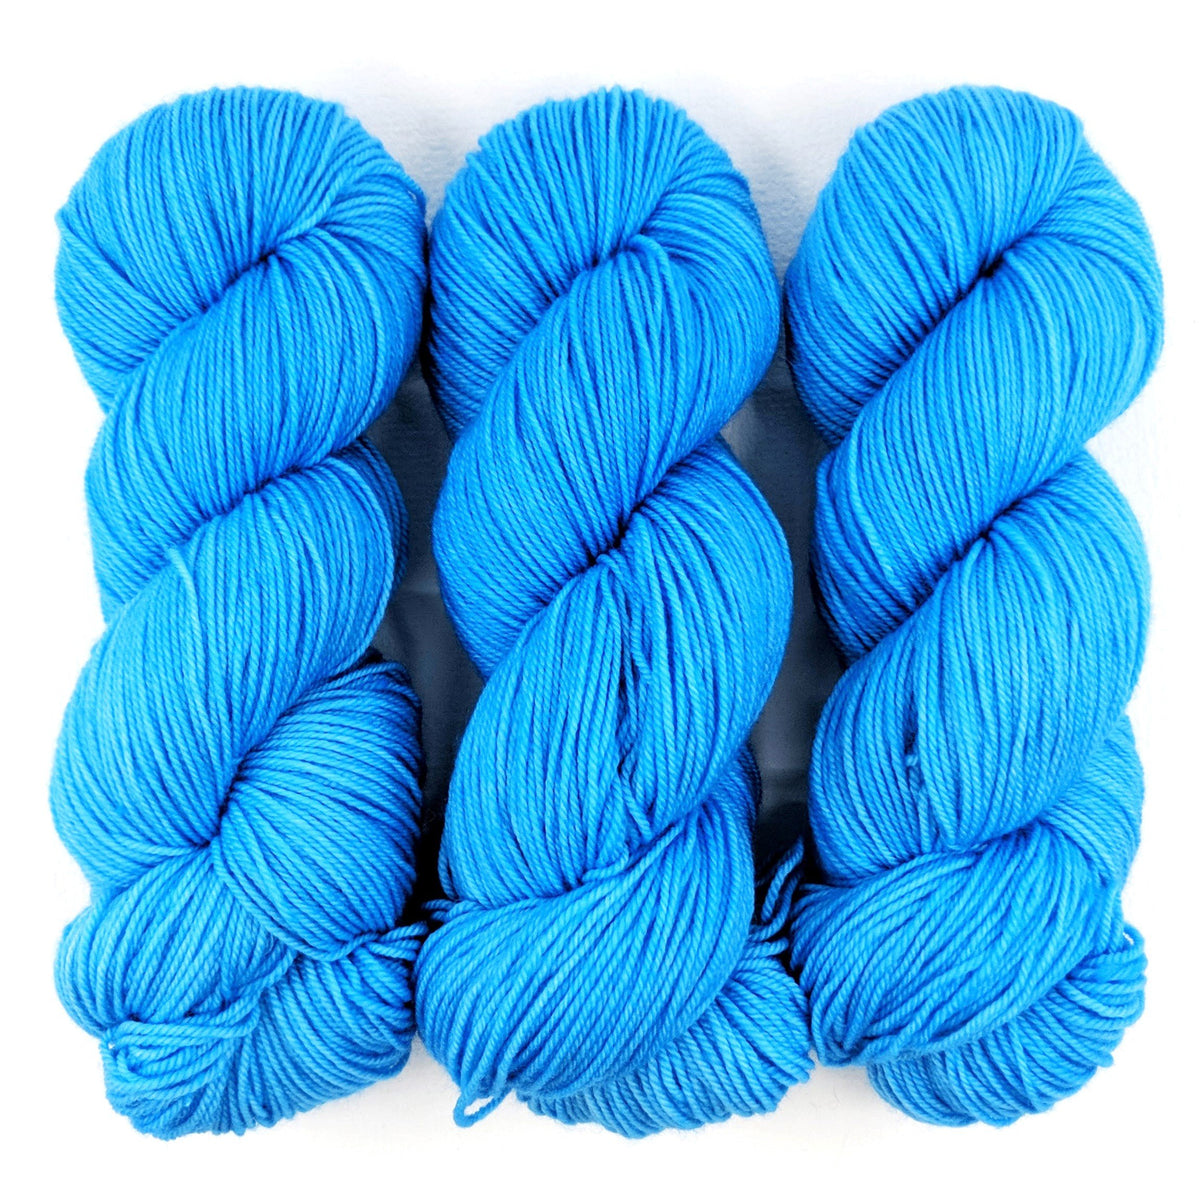 Nothing But Blue Skies - Nettle Soft DK - Dyed Stock